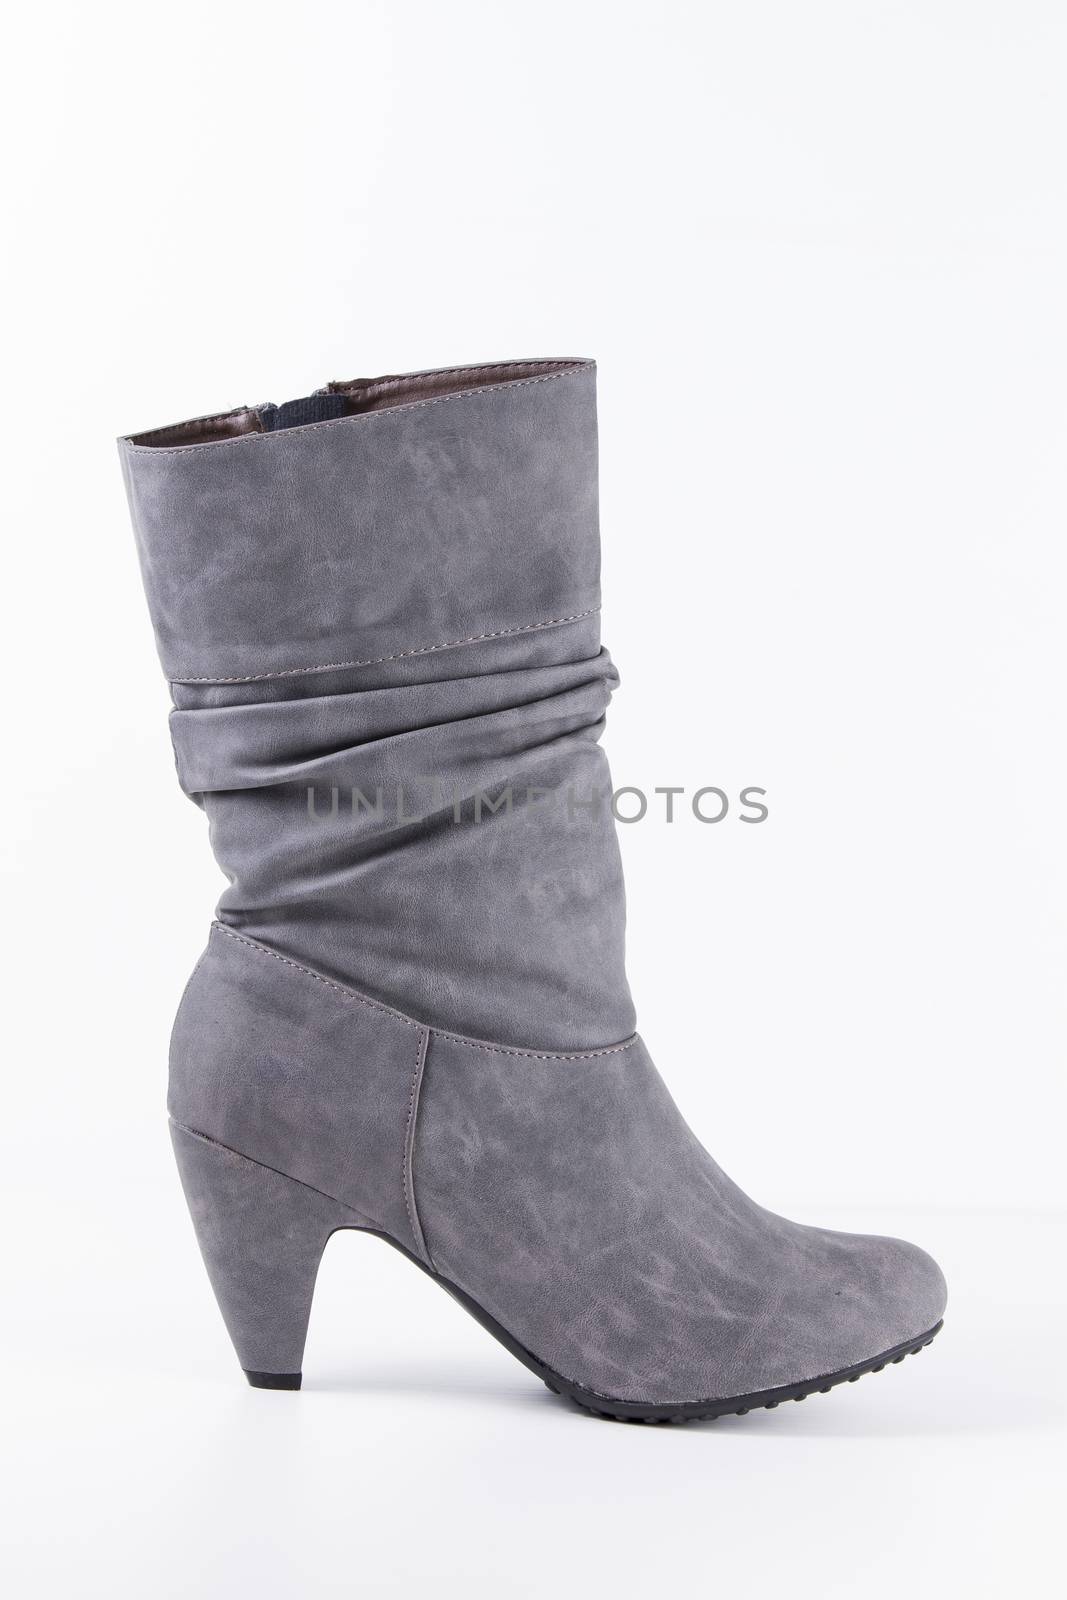 Grey leather boots on white background, isolated product.